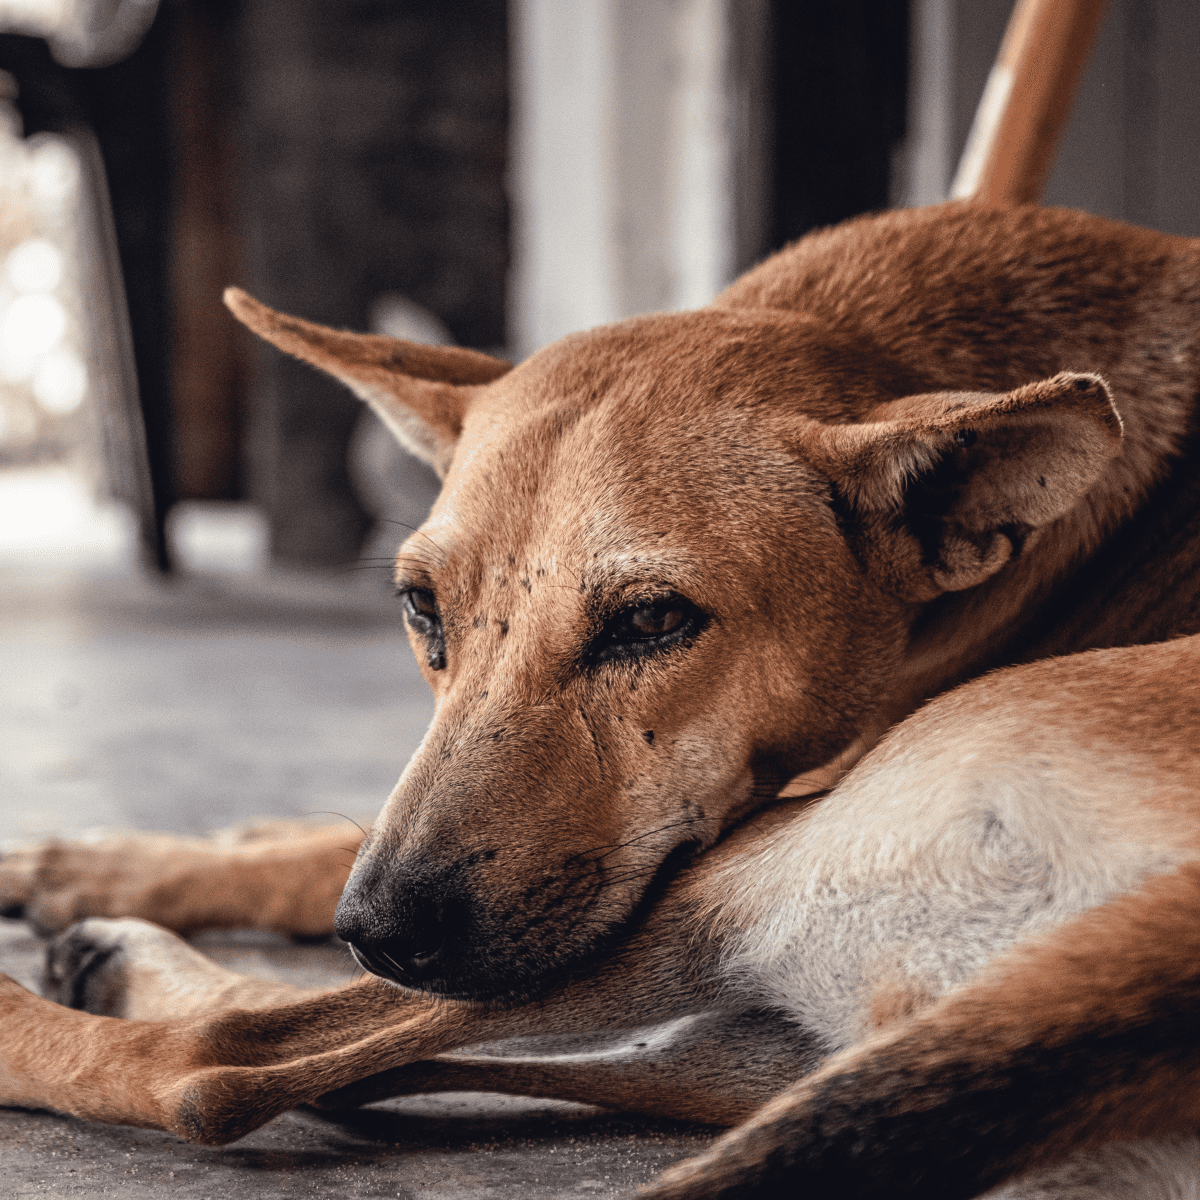 how does euthanasia work on dogs